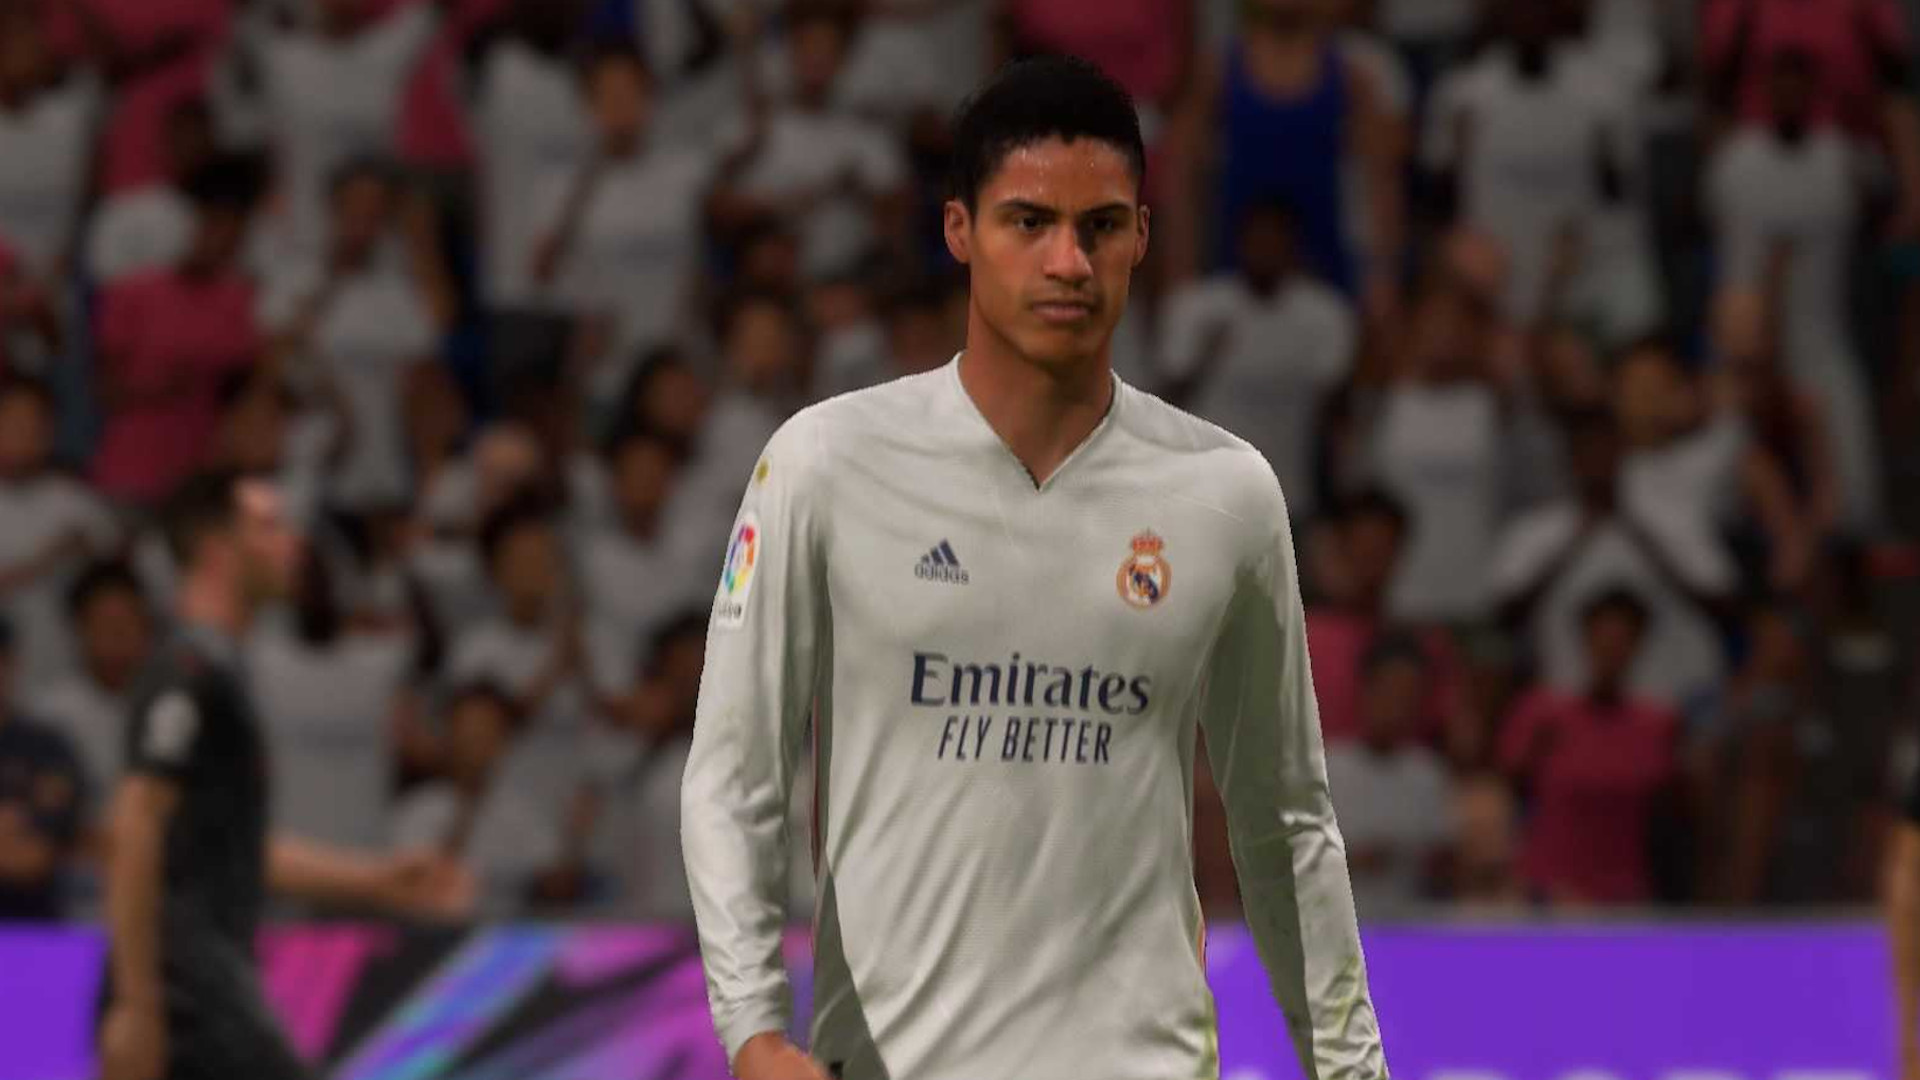 FIFA 22 best CBs: Varane walks across the pitch in a white Real Madrid shirt.